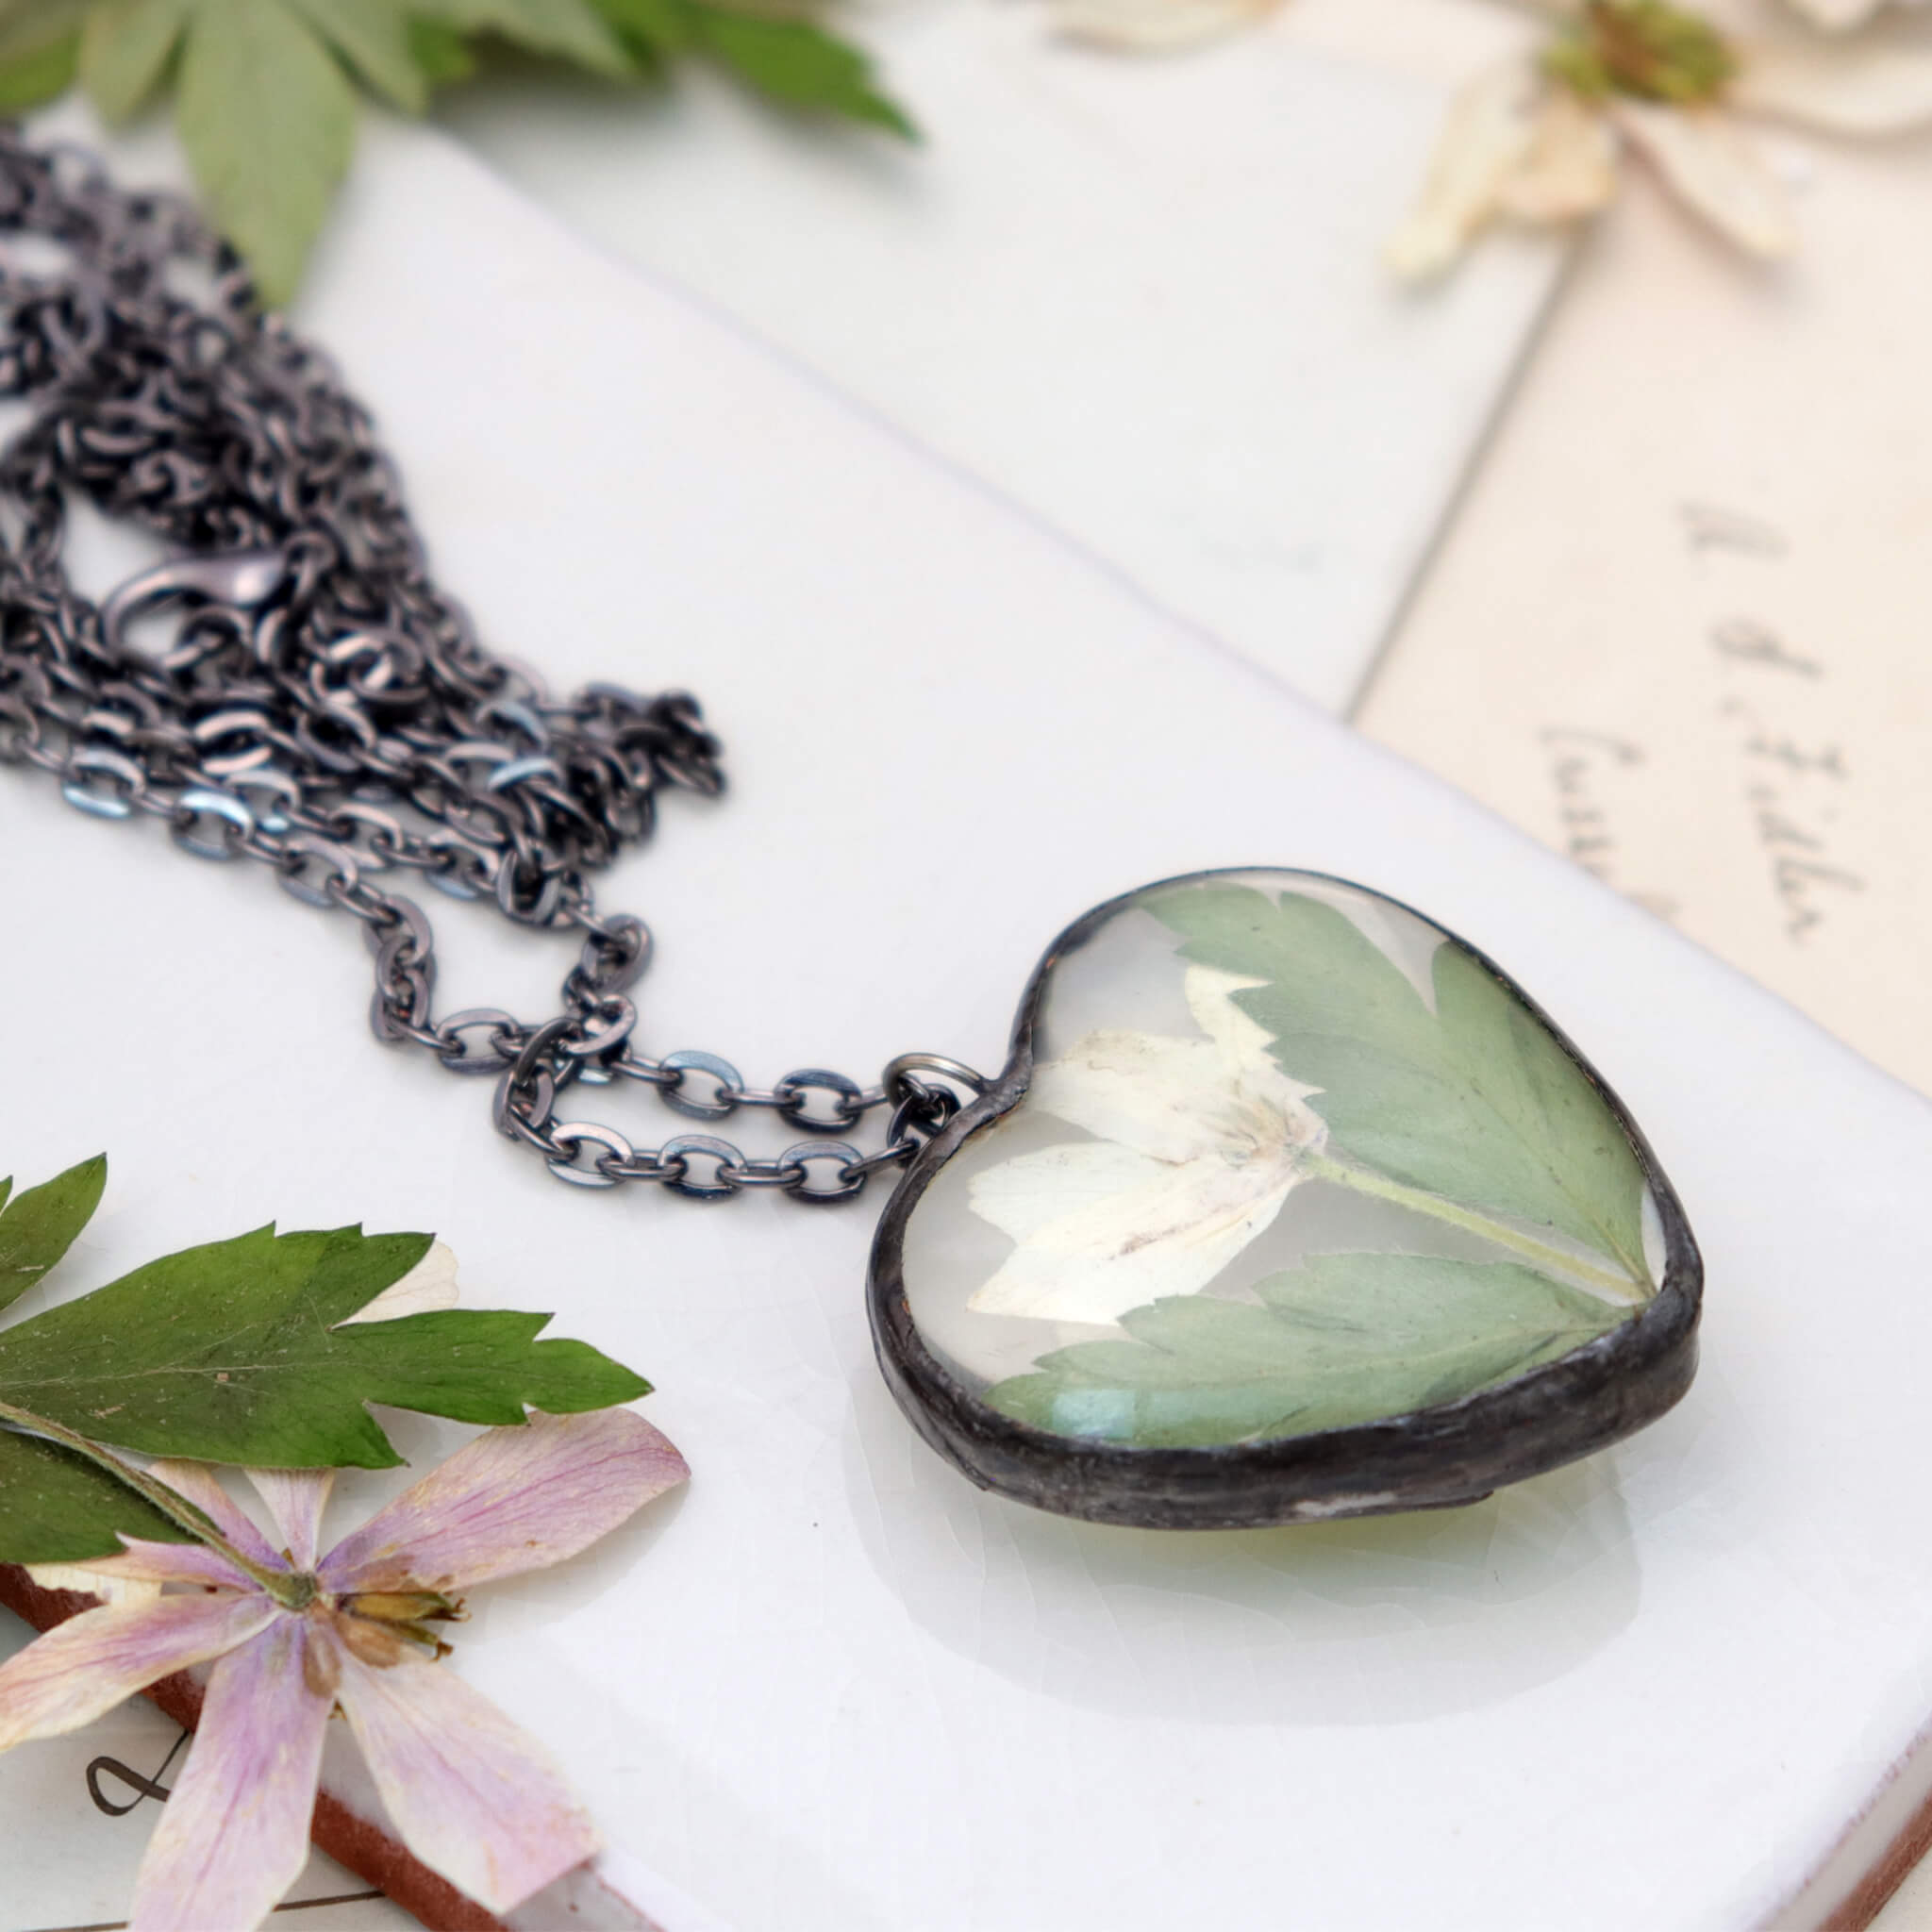 Heart shaped necklace featuring white pressed flowers with green leaves